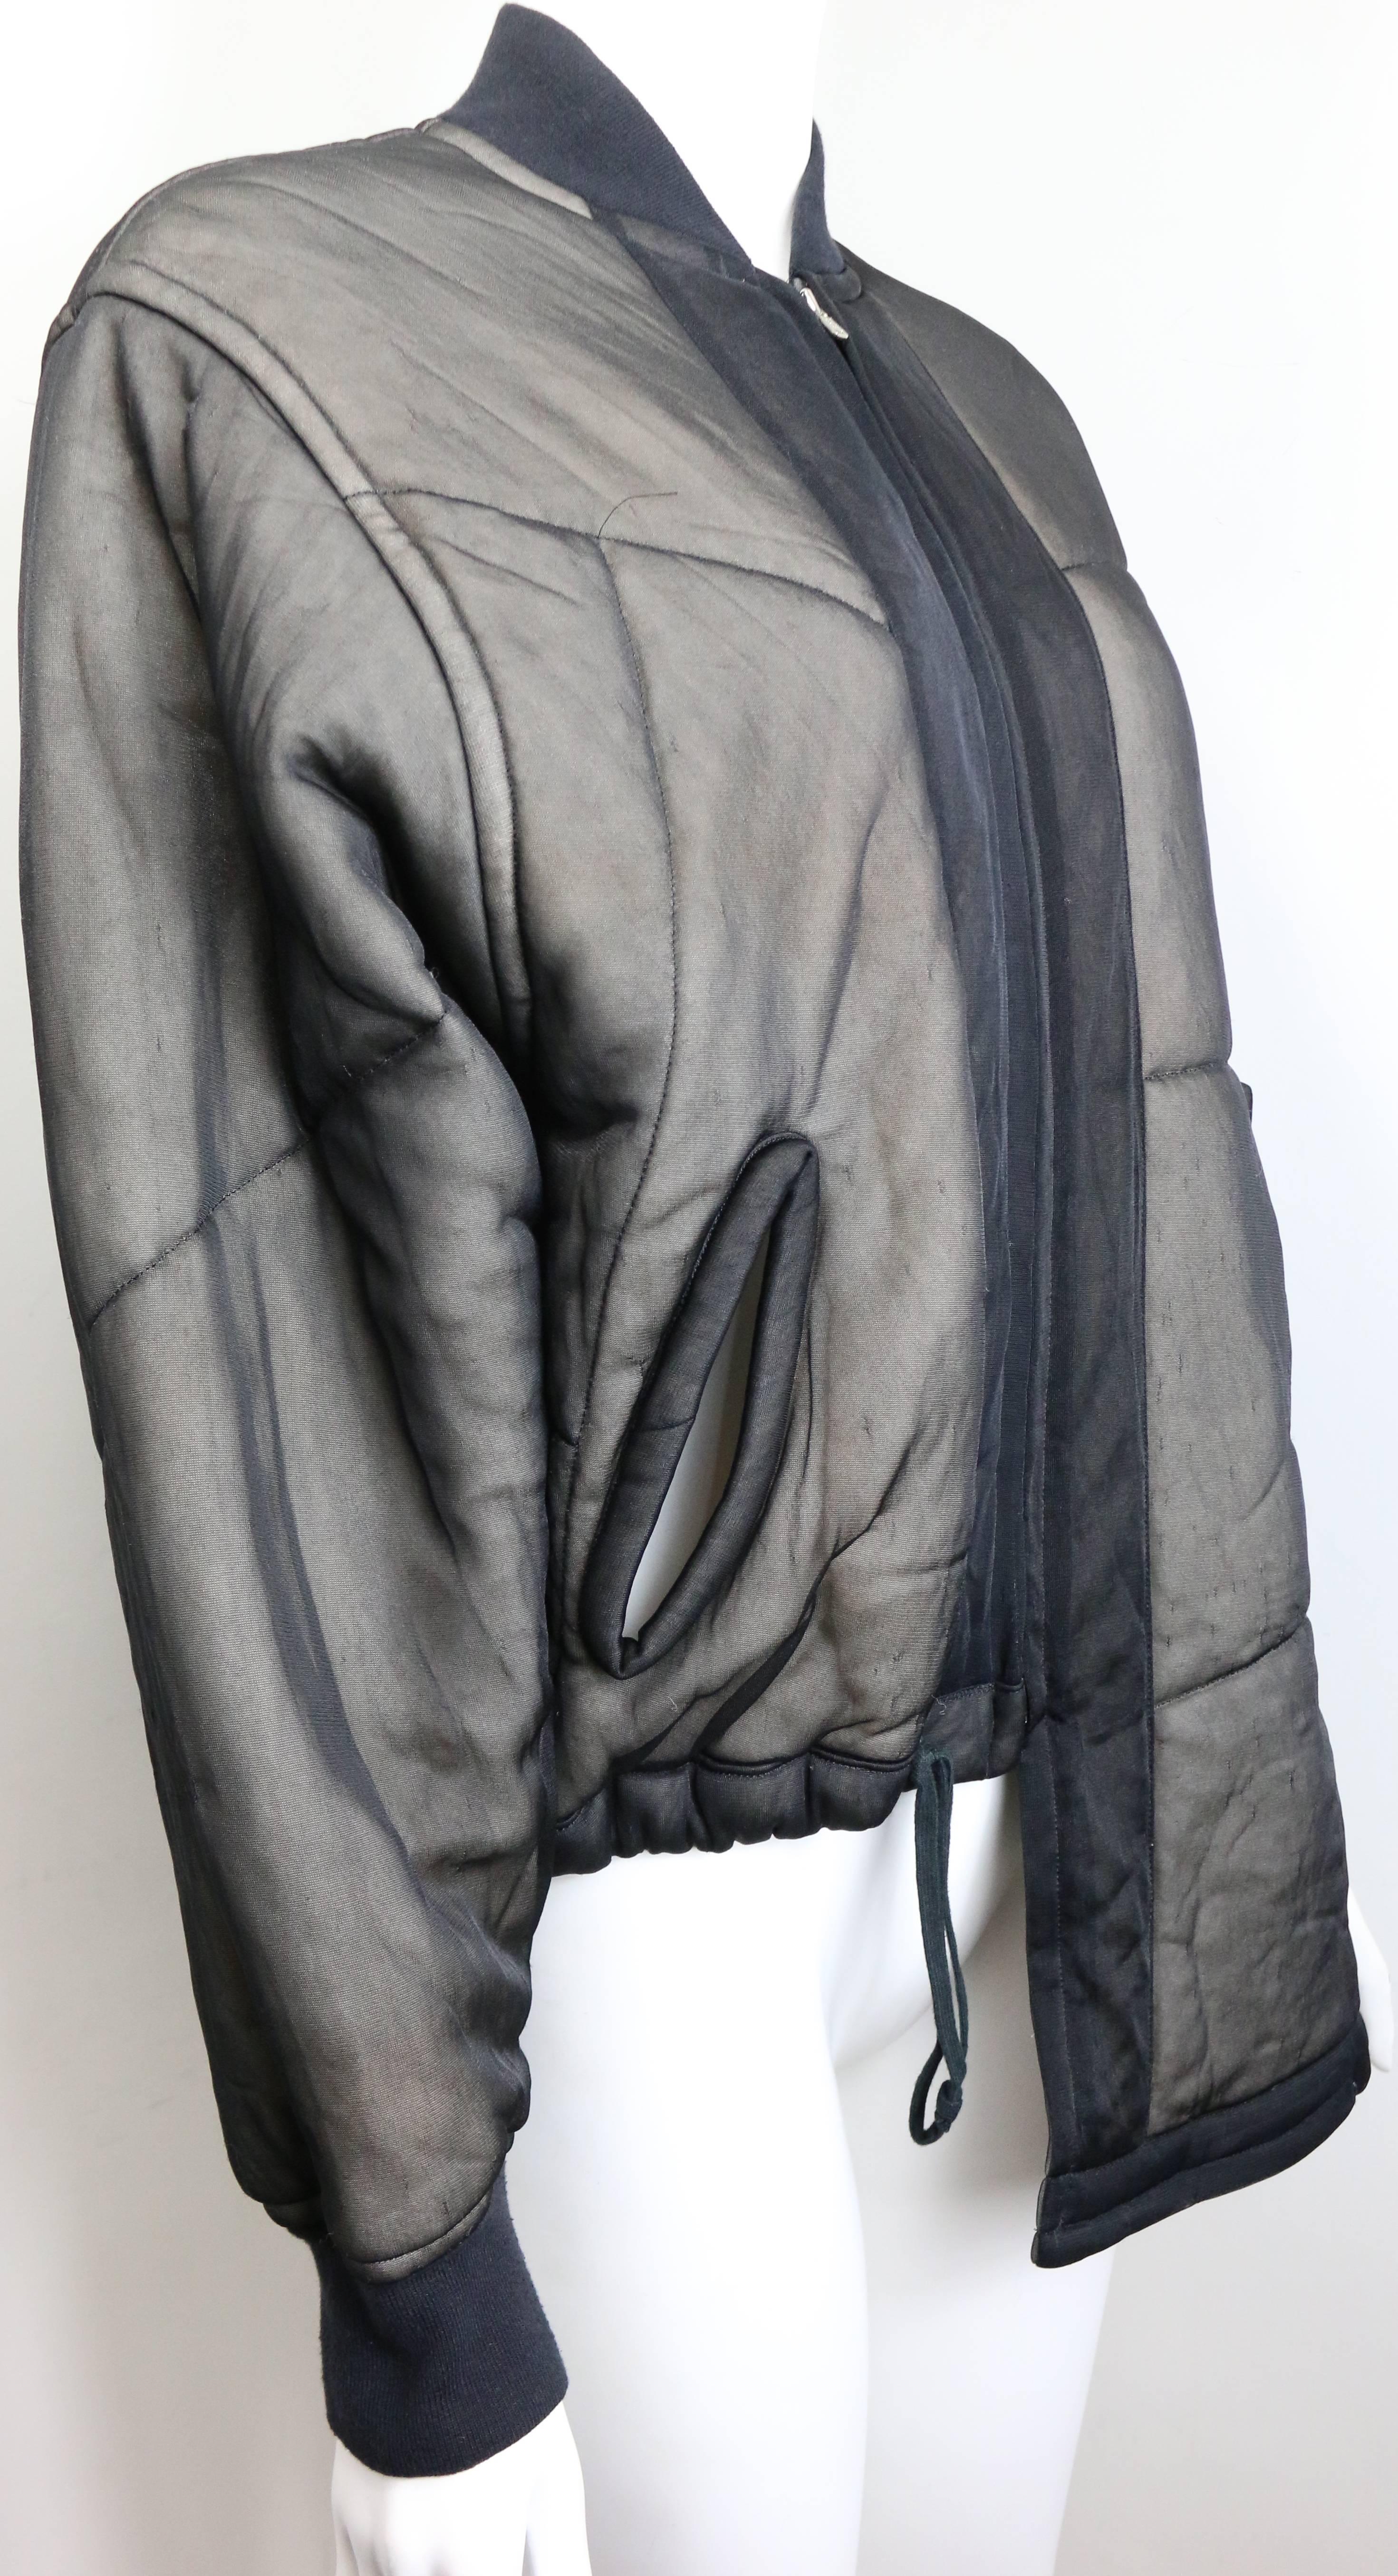 - Vintage 90s Comme des Garcons charcoal grey asymmetric deconstruct bomber jacket.  This piece is complex, and thus provides enormous versitility. Closure with zip to front. 

- Made in Japan. 

- Size S

- 100% Nylon. 

